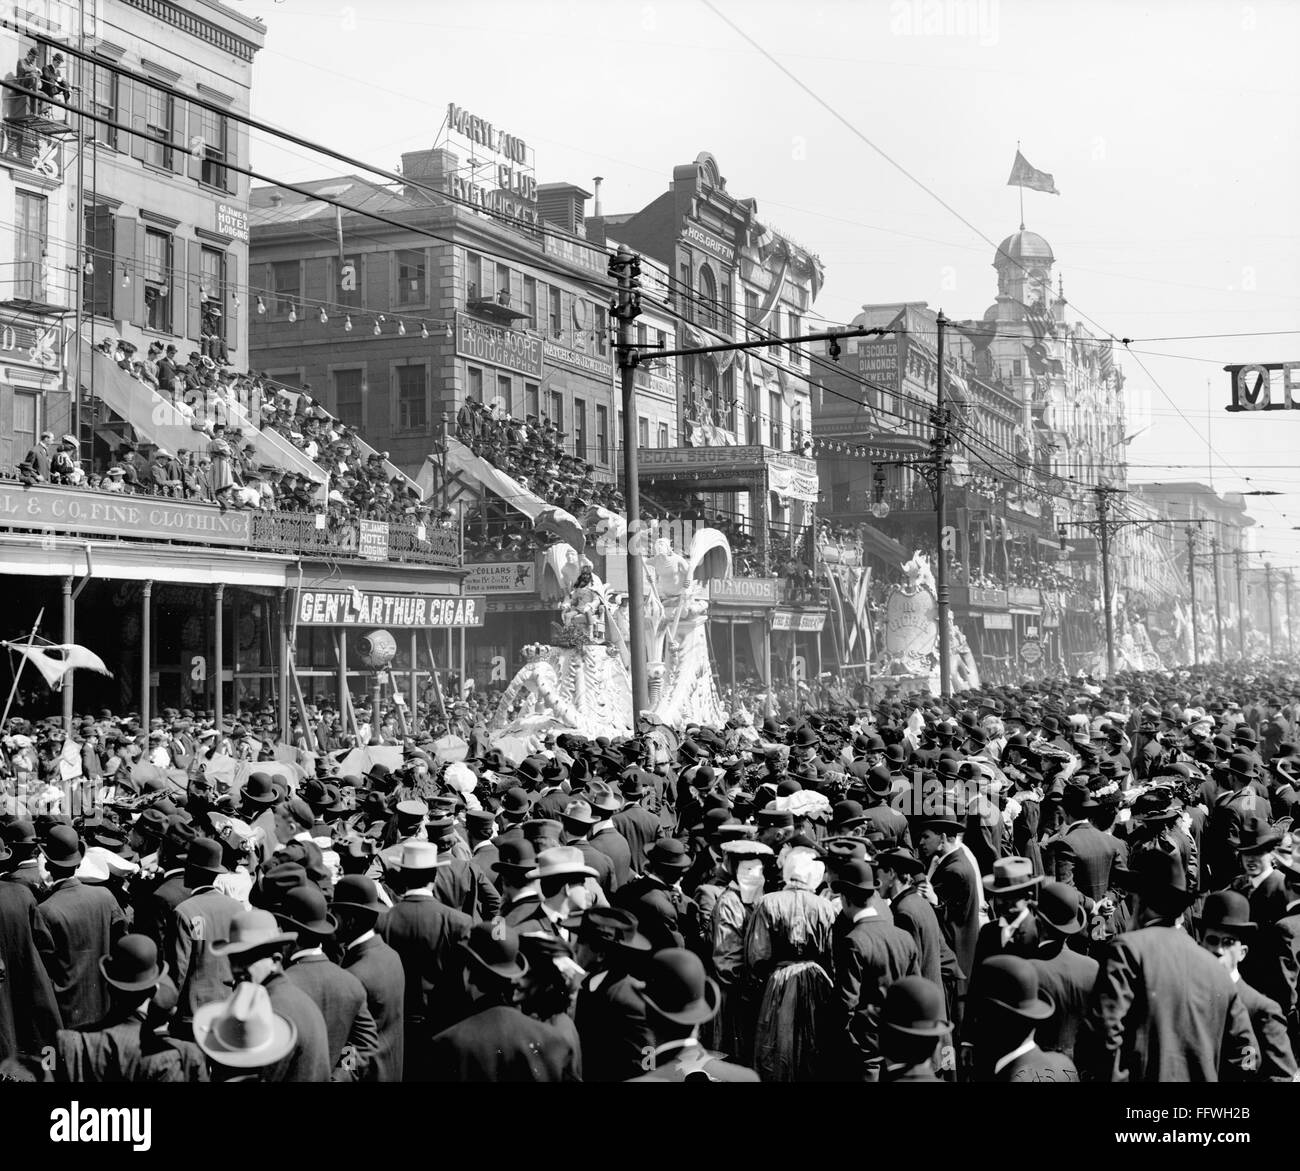 NEW ORLEANS: MARDI GRAS. /nCrowds lining the street in New Orleans, Louisiana, to watch the Rex parade during Mardi Gras festivities. Photographed c1900. Stock Photo